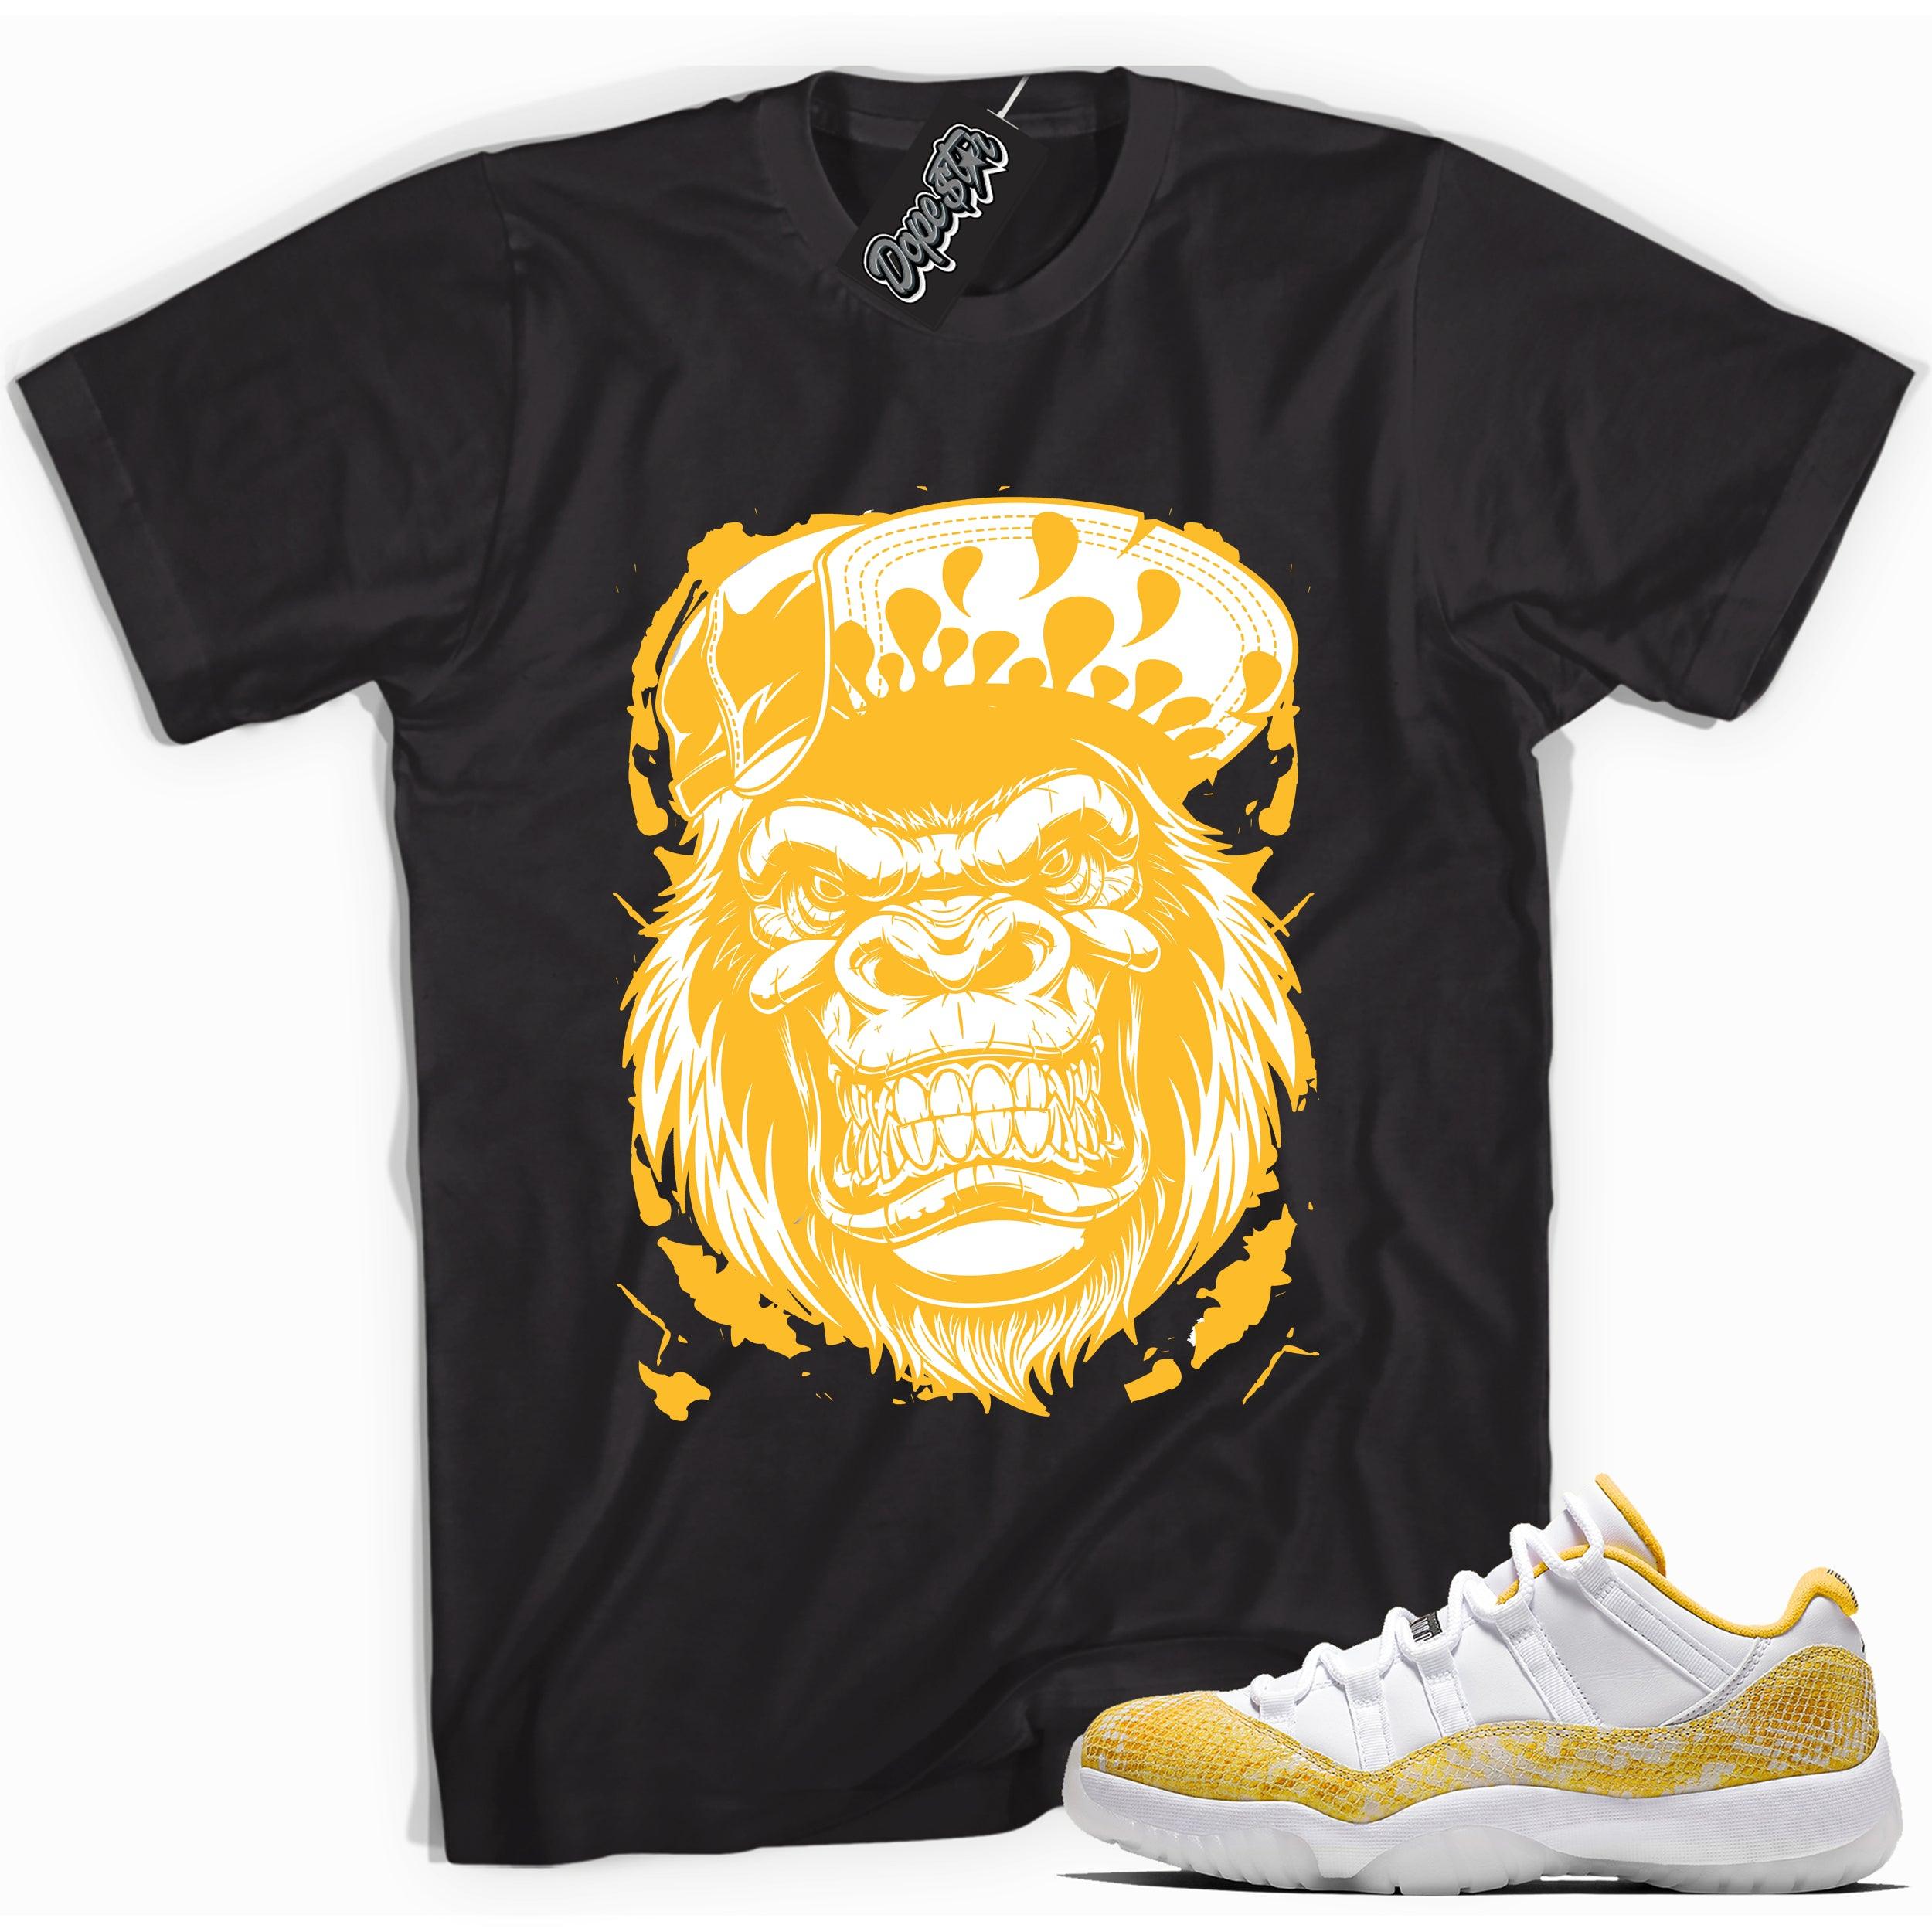 Cool black graphic tee with 'gorilla beast' print, that perfectly matches  Air Jordan 11 Low Yellow Snakeskin sneakers